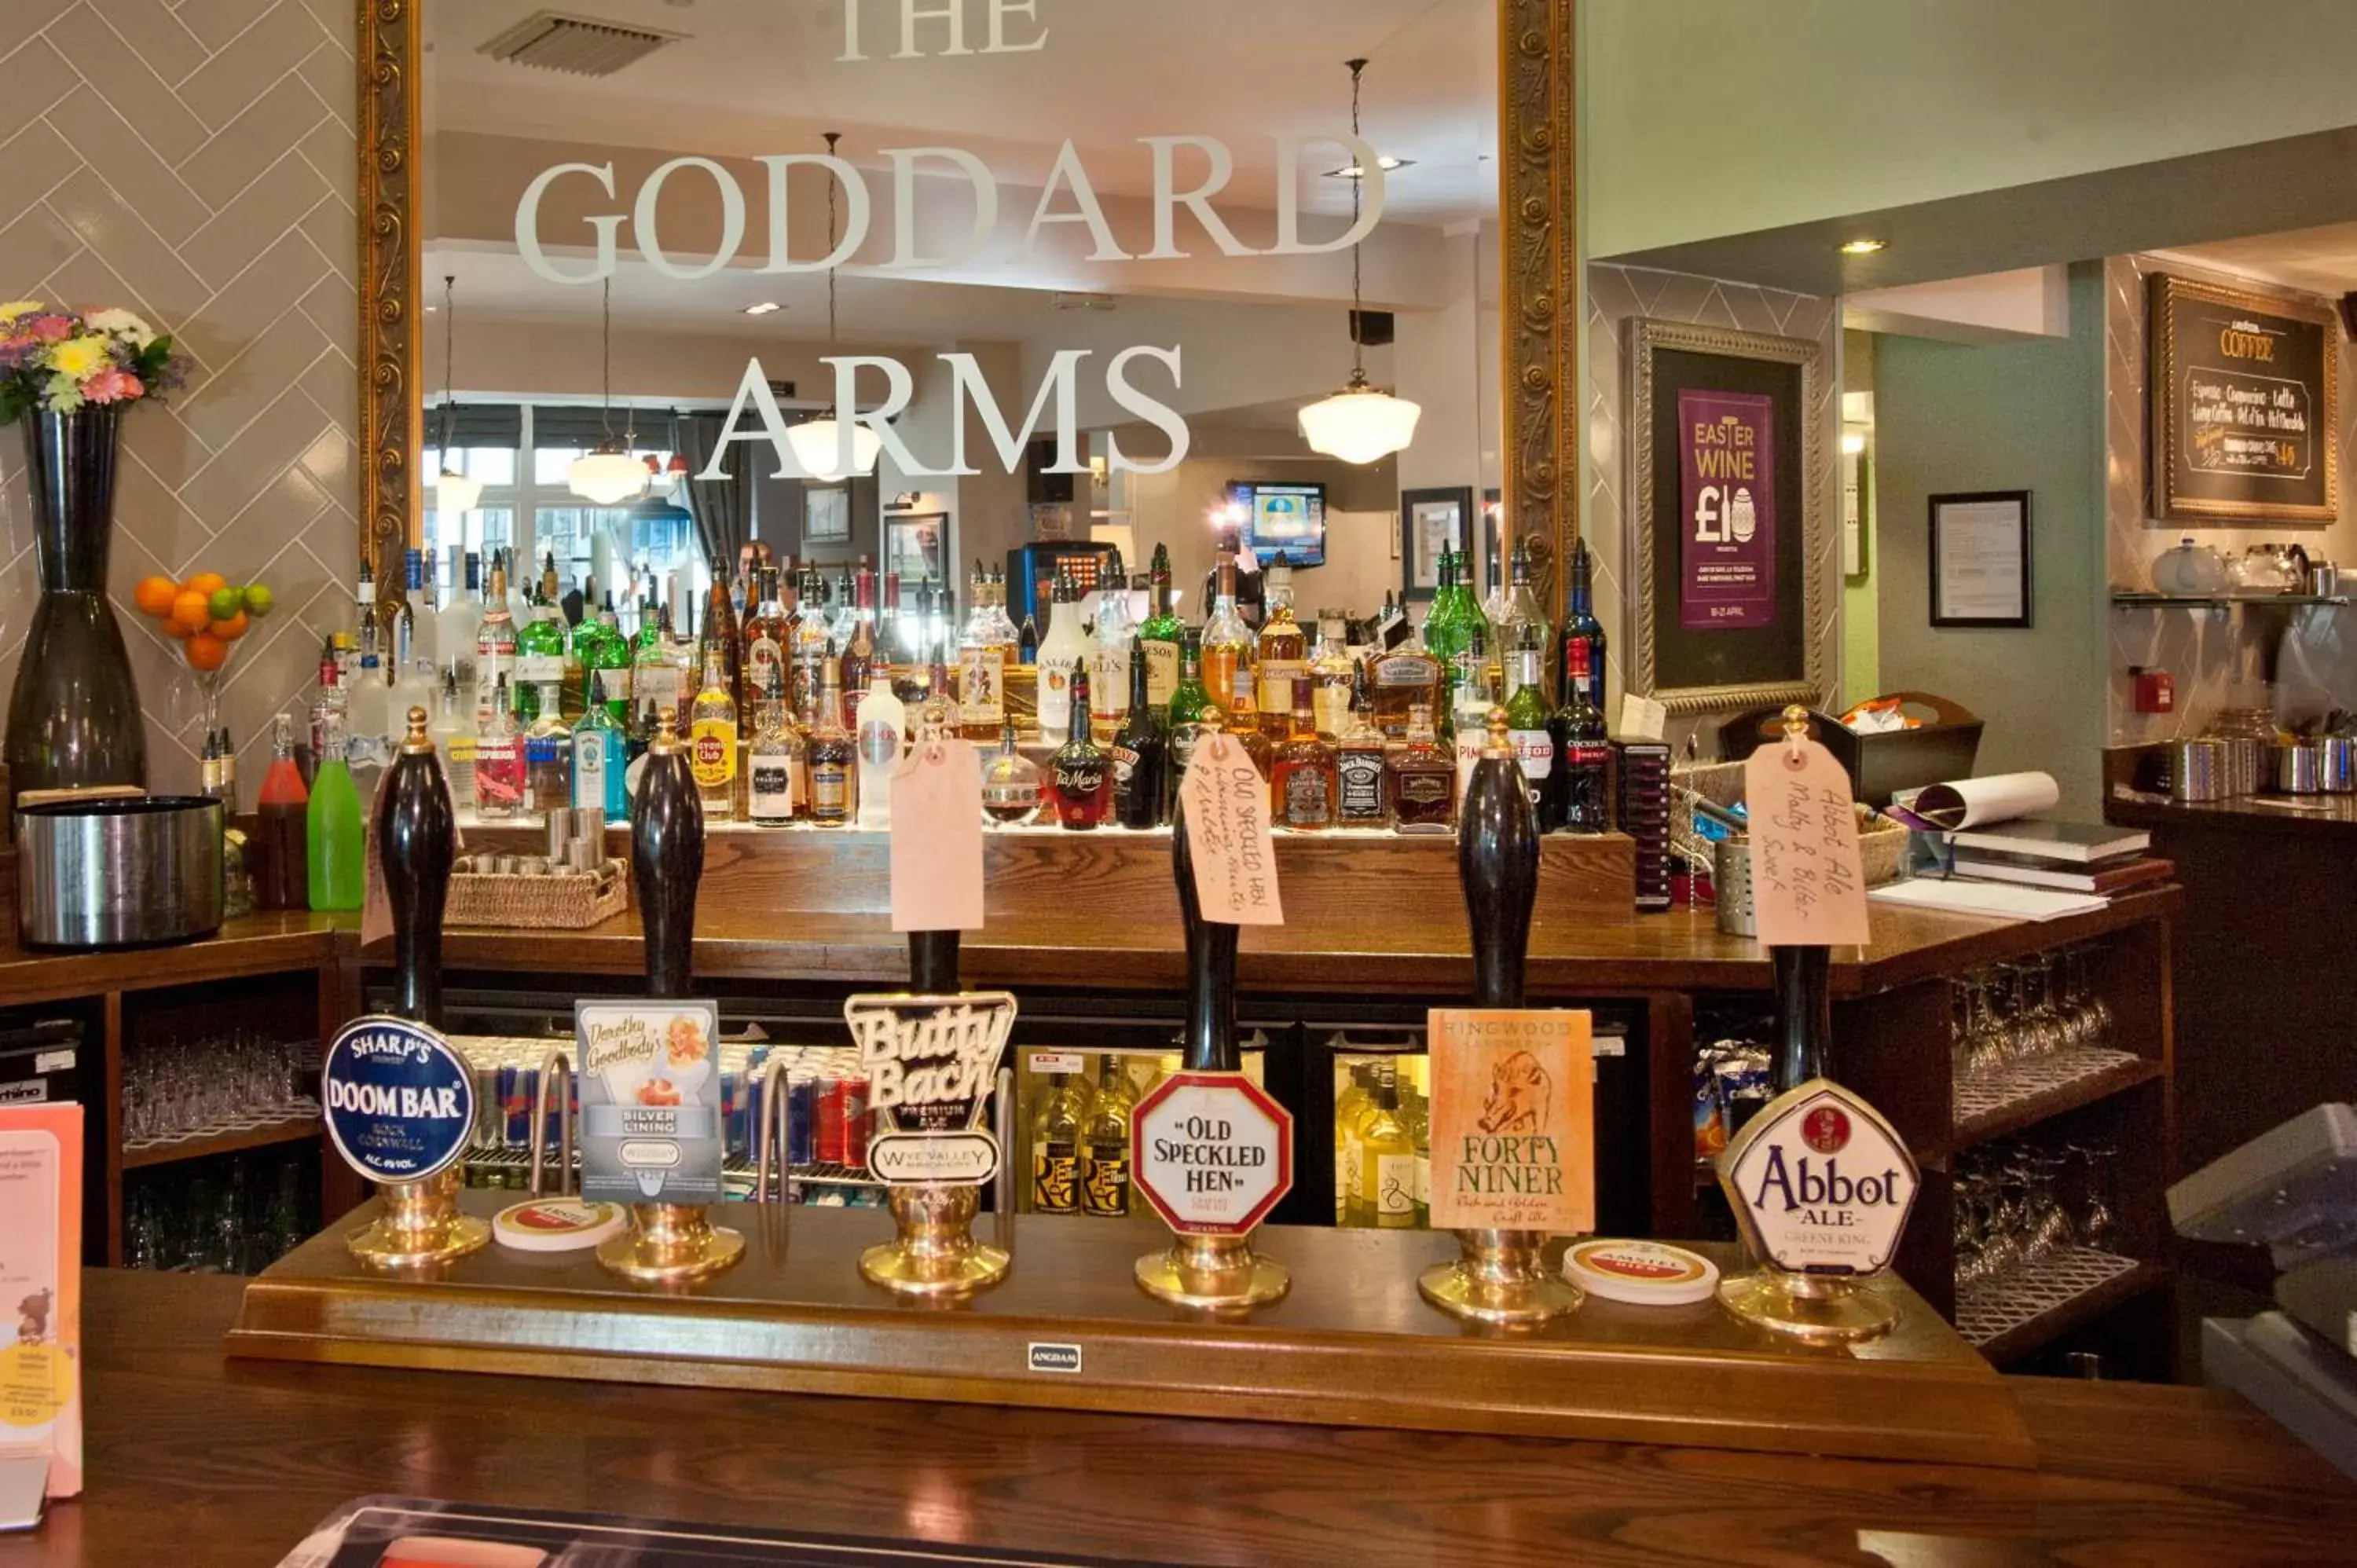 Alcoholic drinks in The Goddard Arms